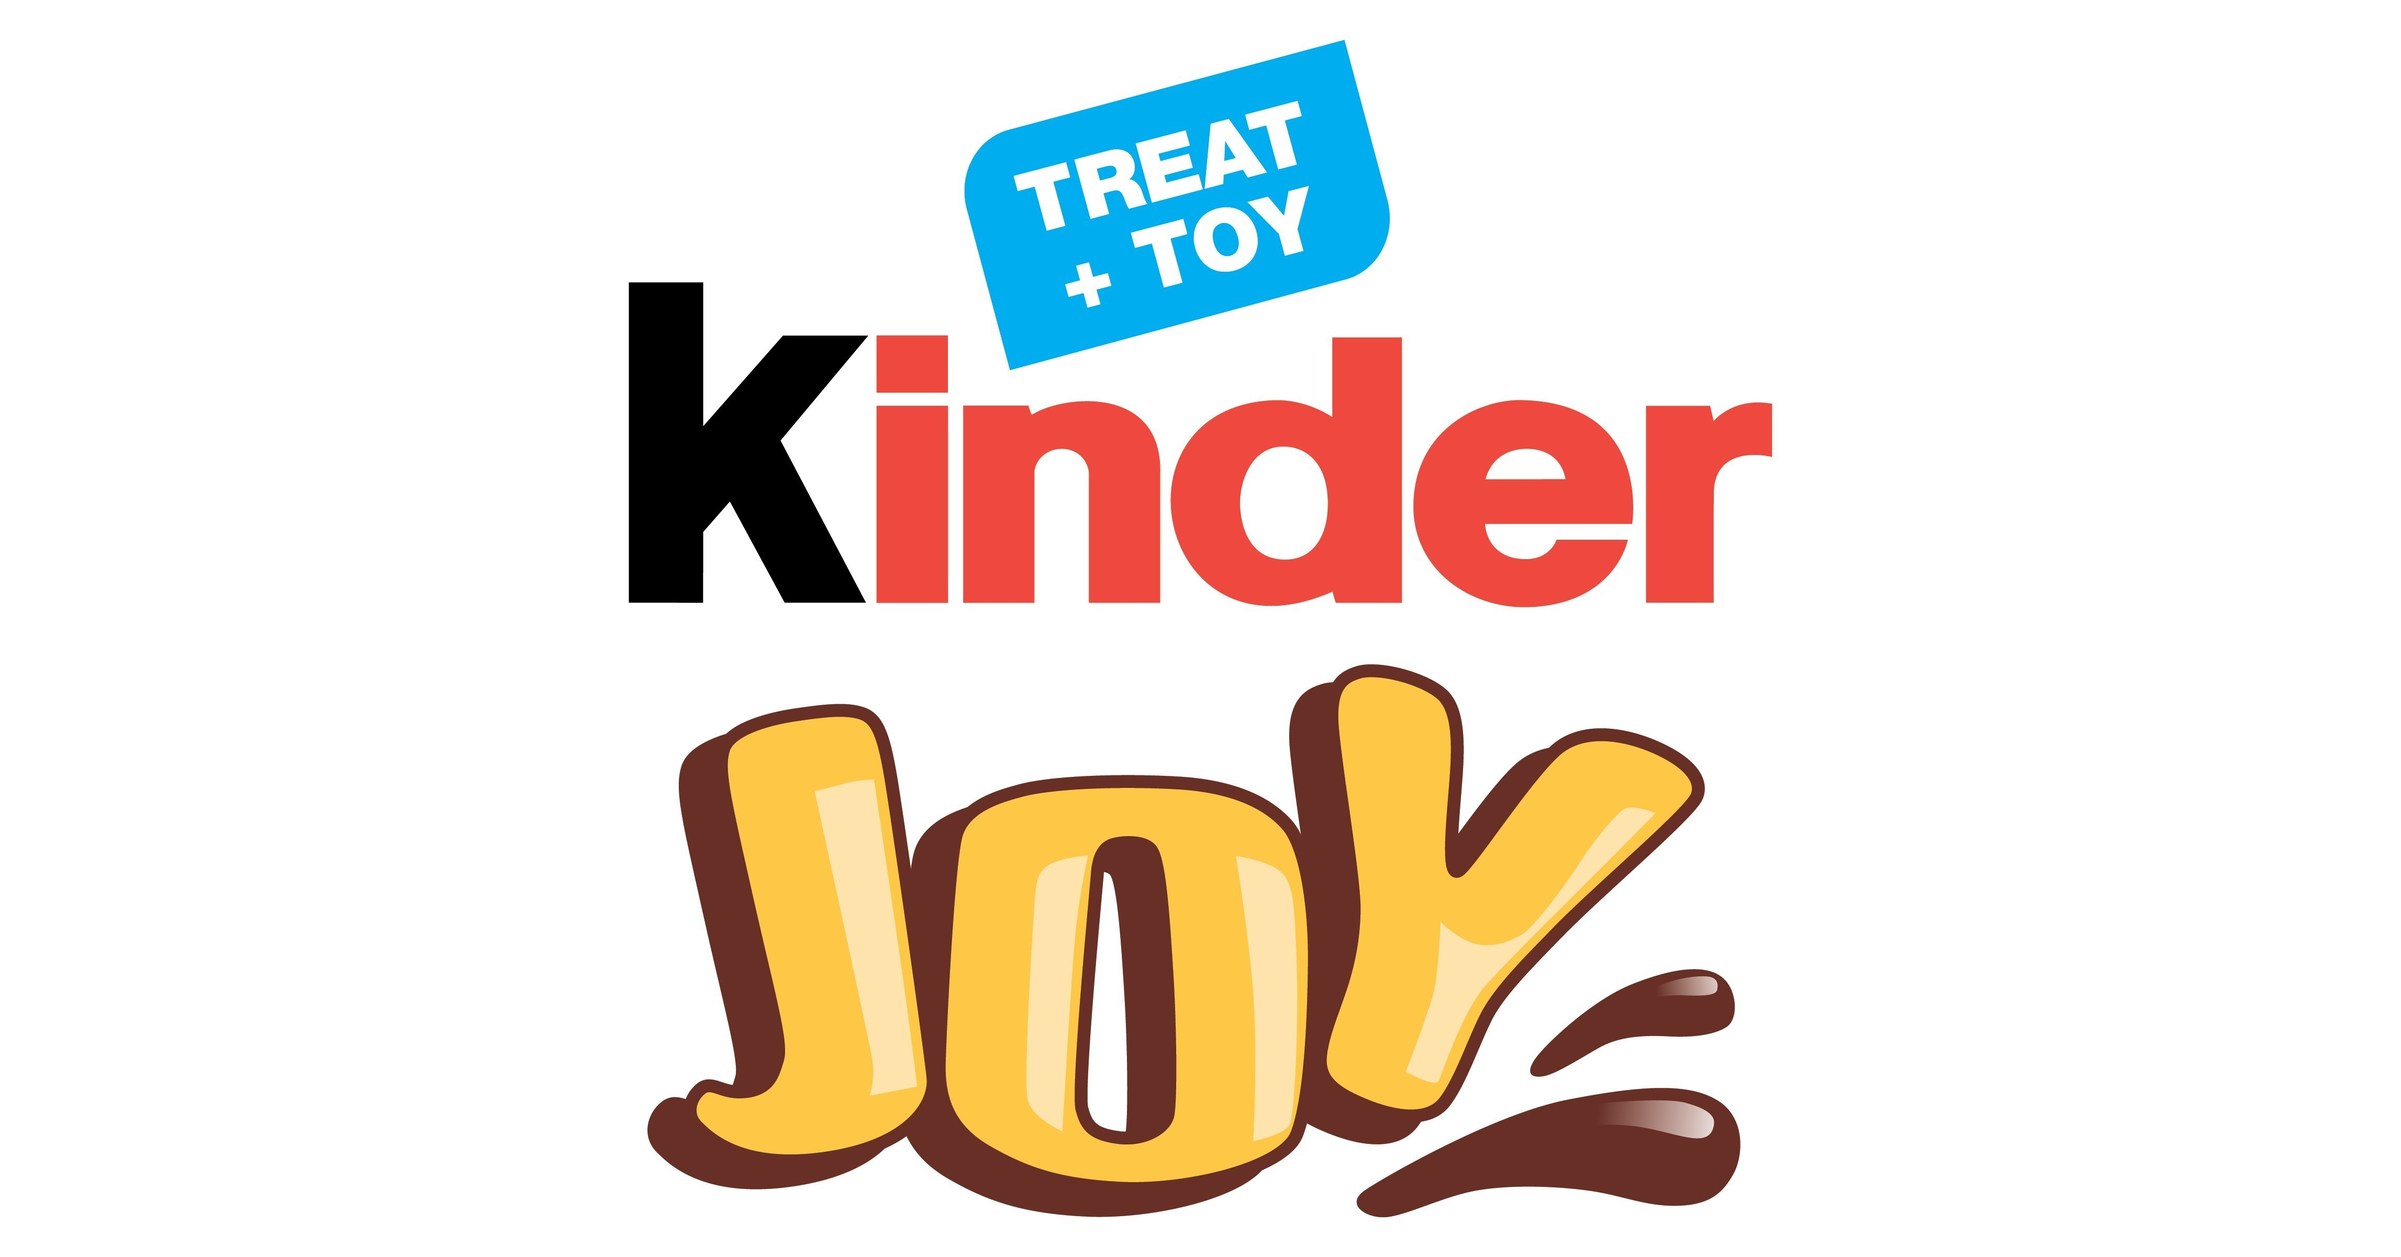 Kinder Joy candy now comes with rockets, rovers and other space toys